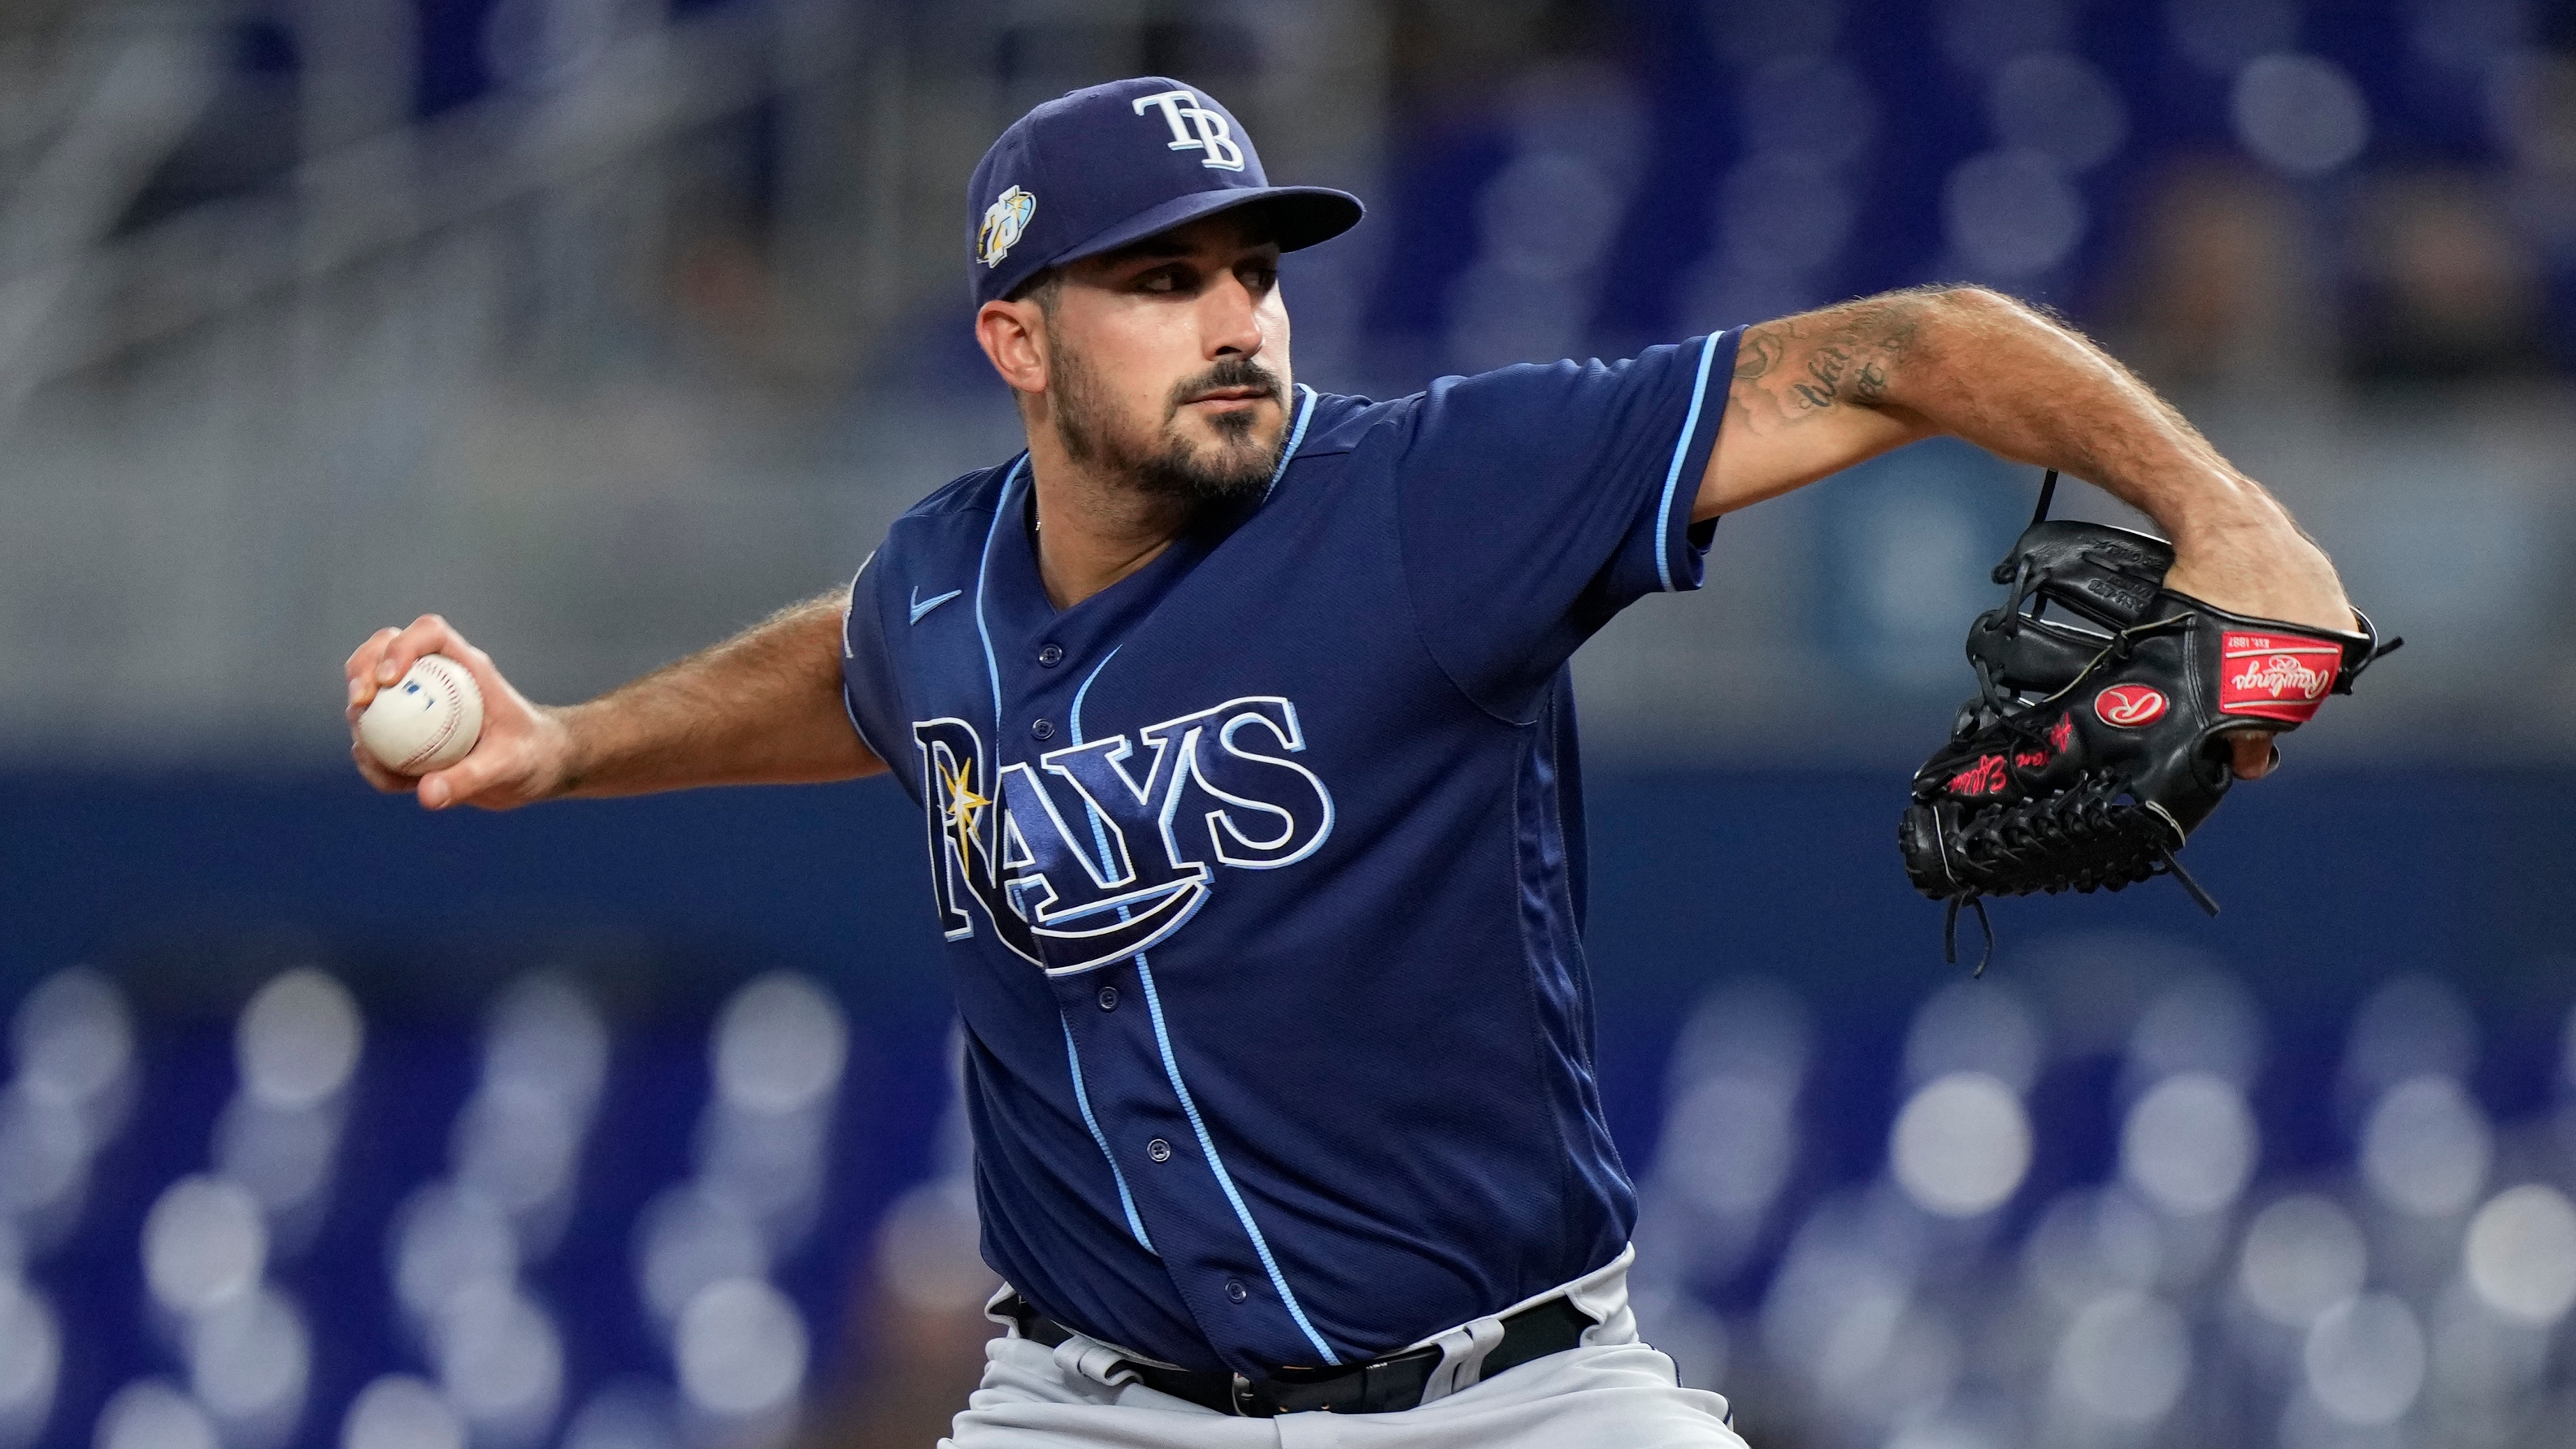 Lowe and Arozarena help surging Tampa Bay Rays beat Miami Marlins